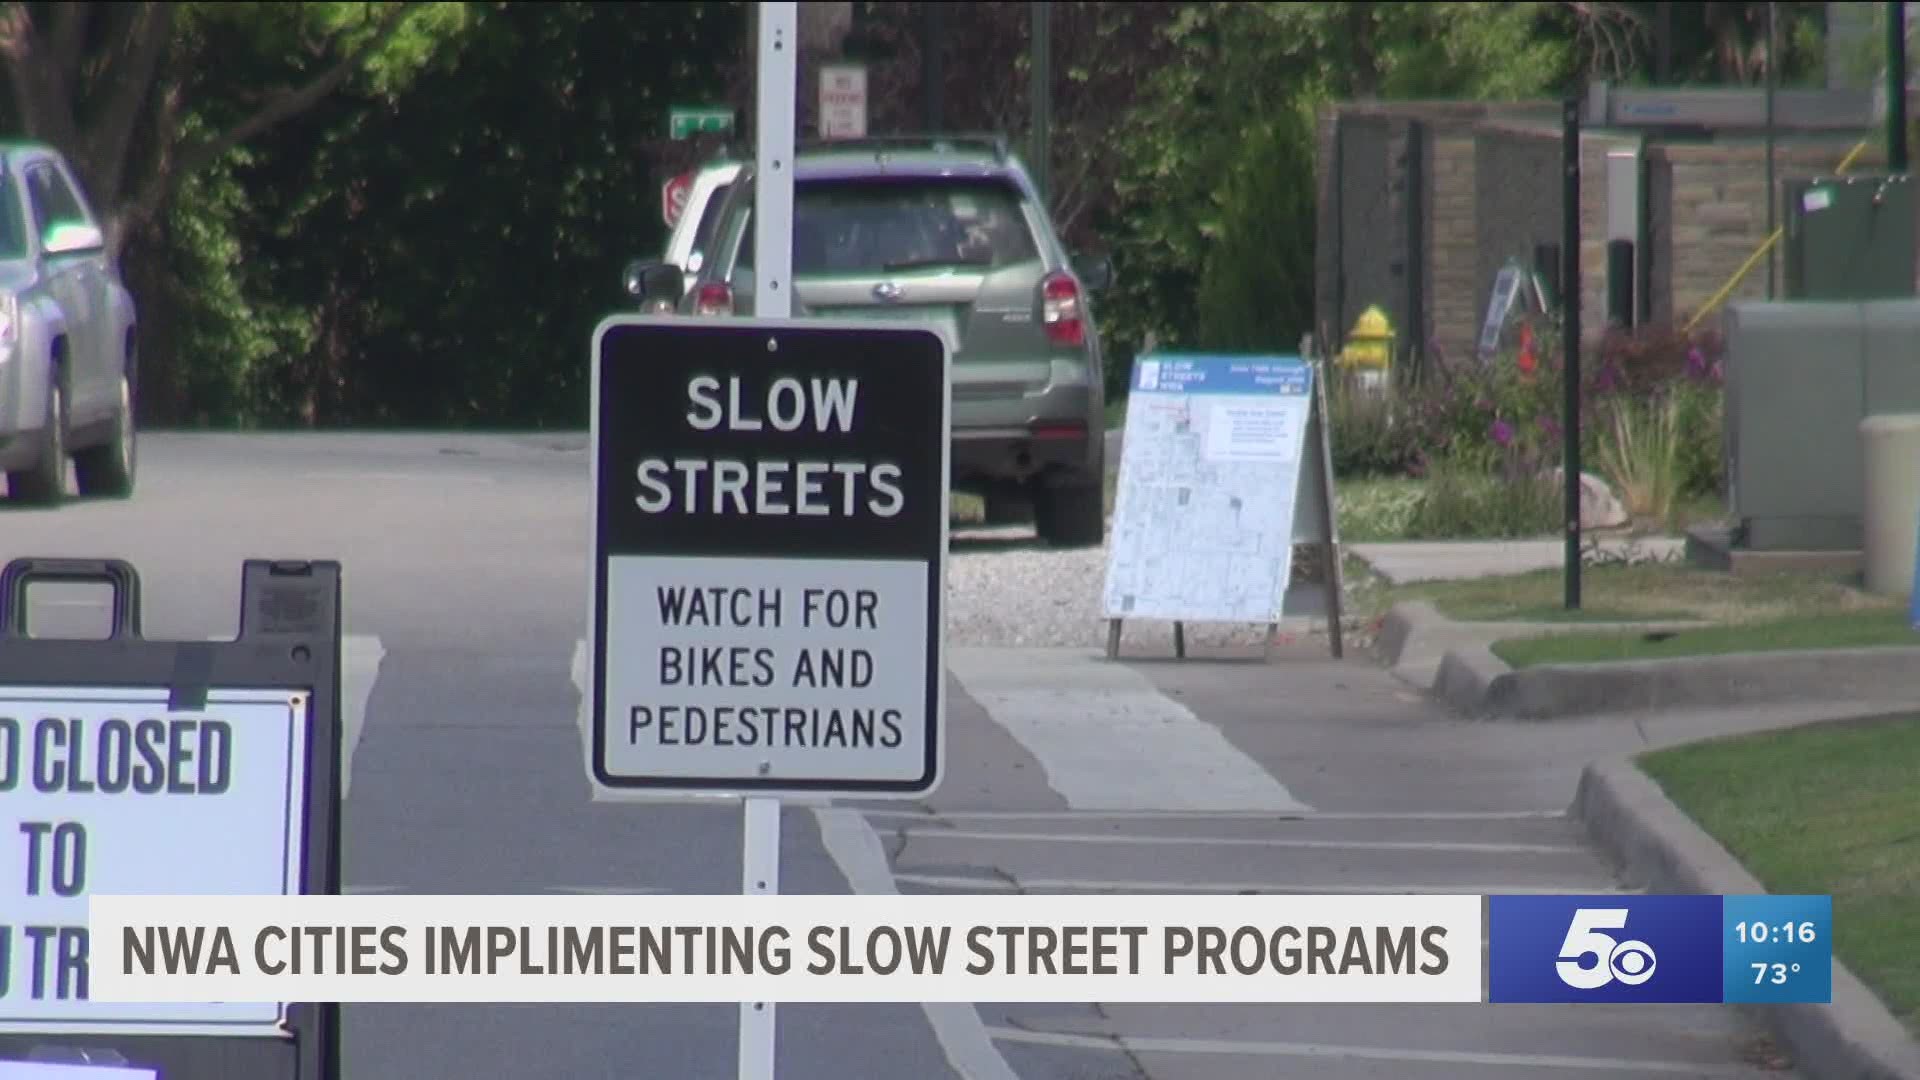 NWA Cities implementing slow street programs